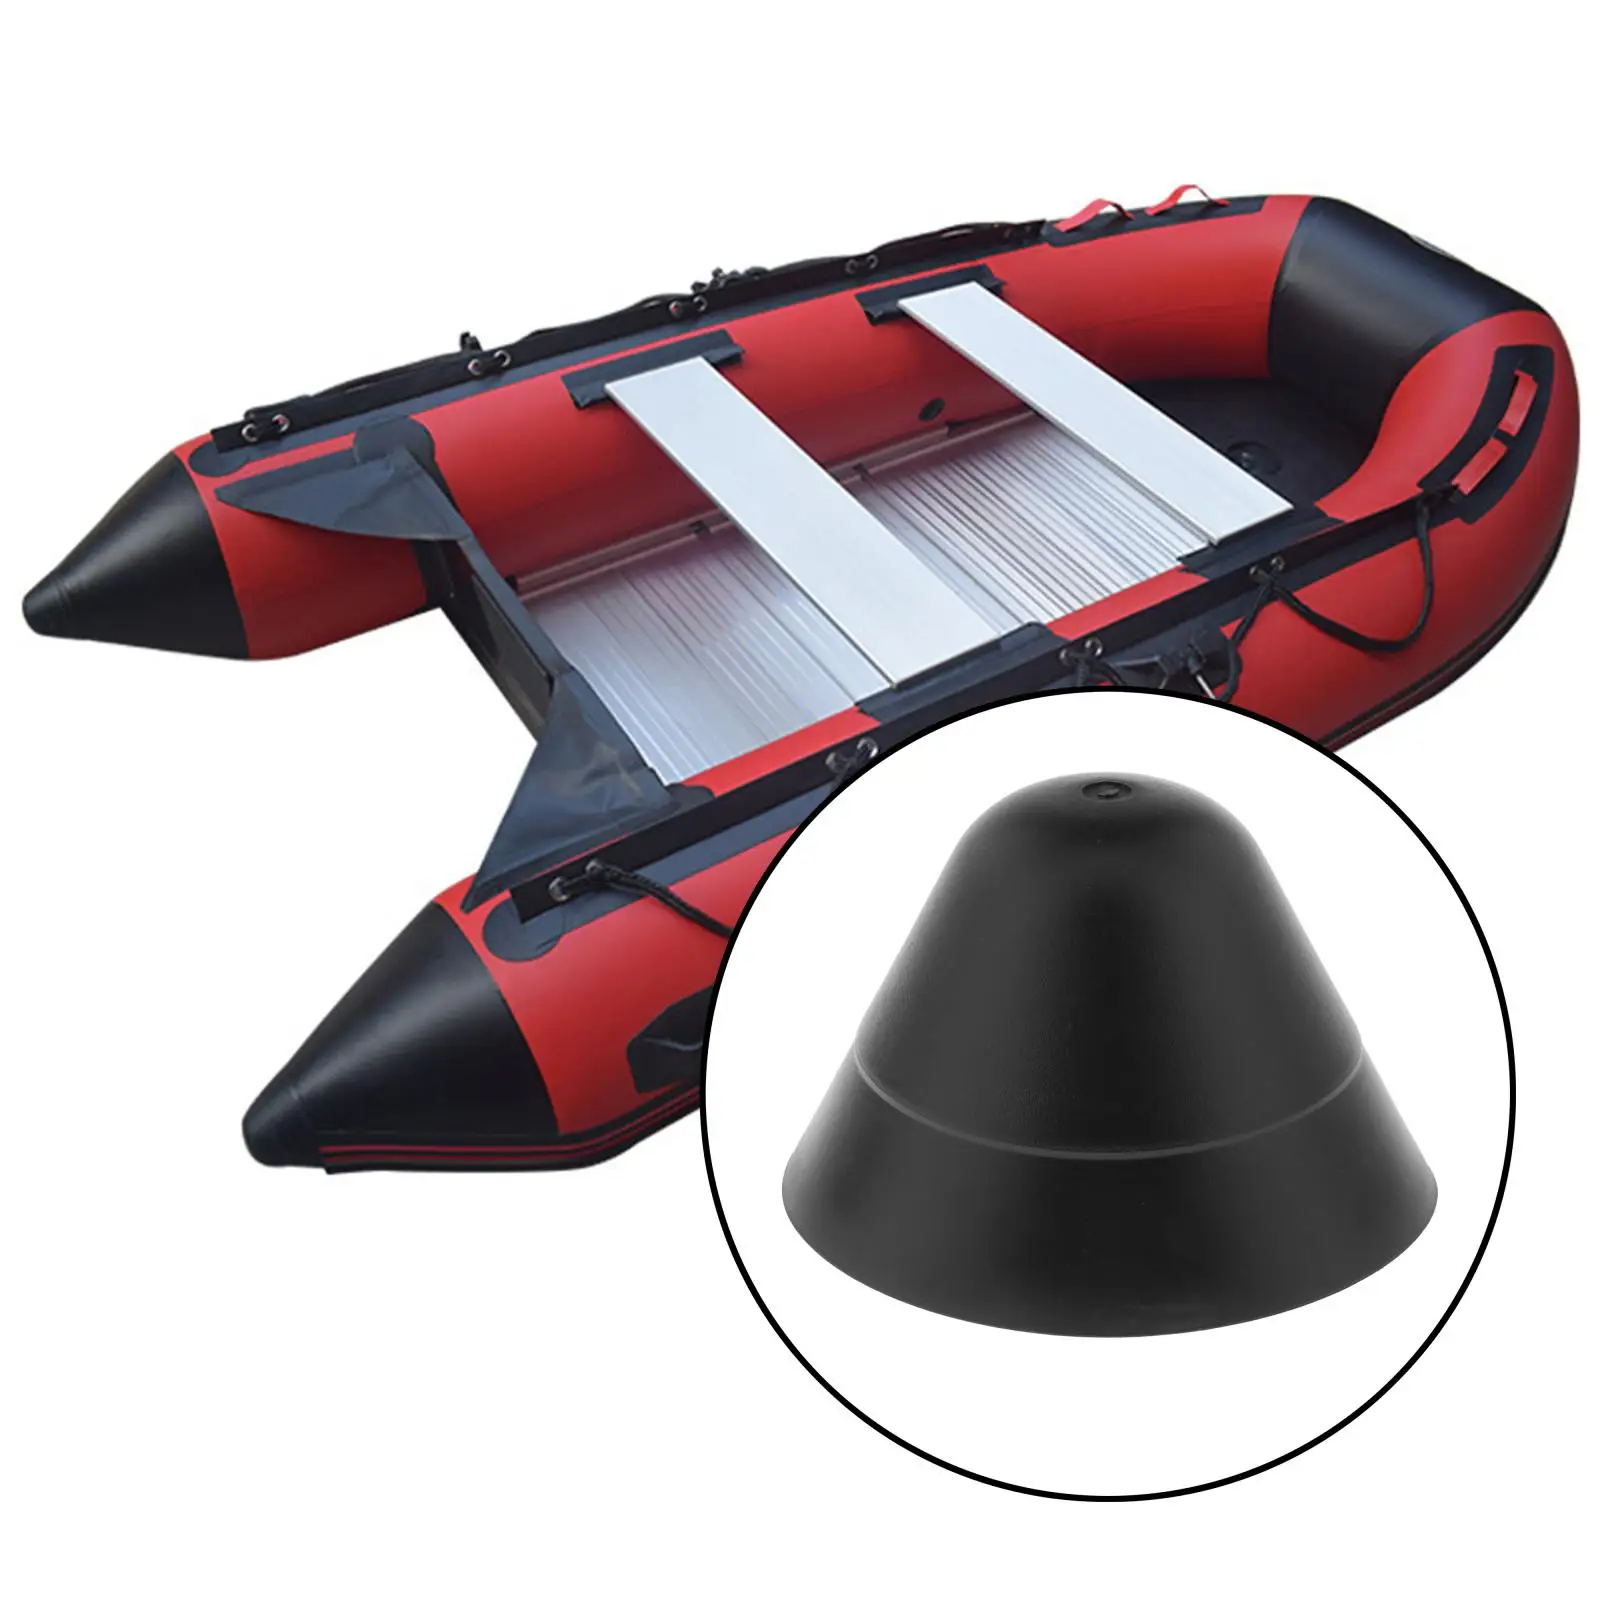 Boat Head Protector Anti-Collision Crashproof Head Prevent Impact for Yacht Kayak Rubber Dinghy Inflatable Canoe, 90 Degrees